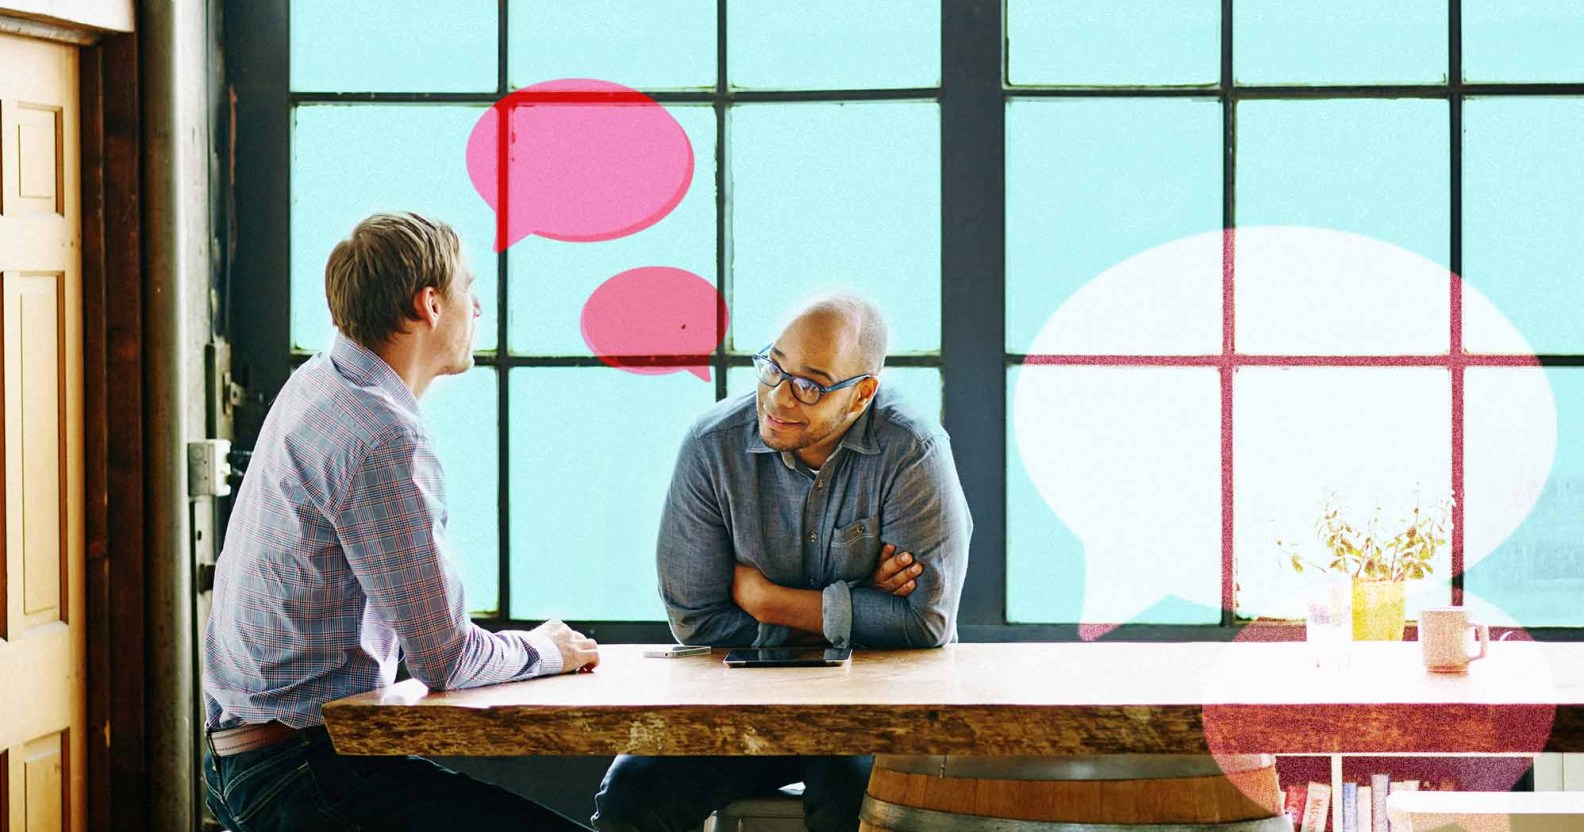 Two men are speaking at a table. One man is wearing classes and looking at the other man. There are illustrations of speech bubbles.